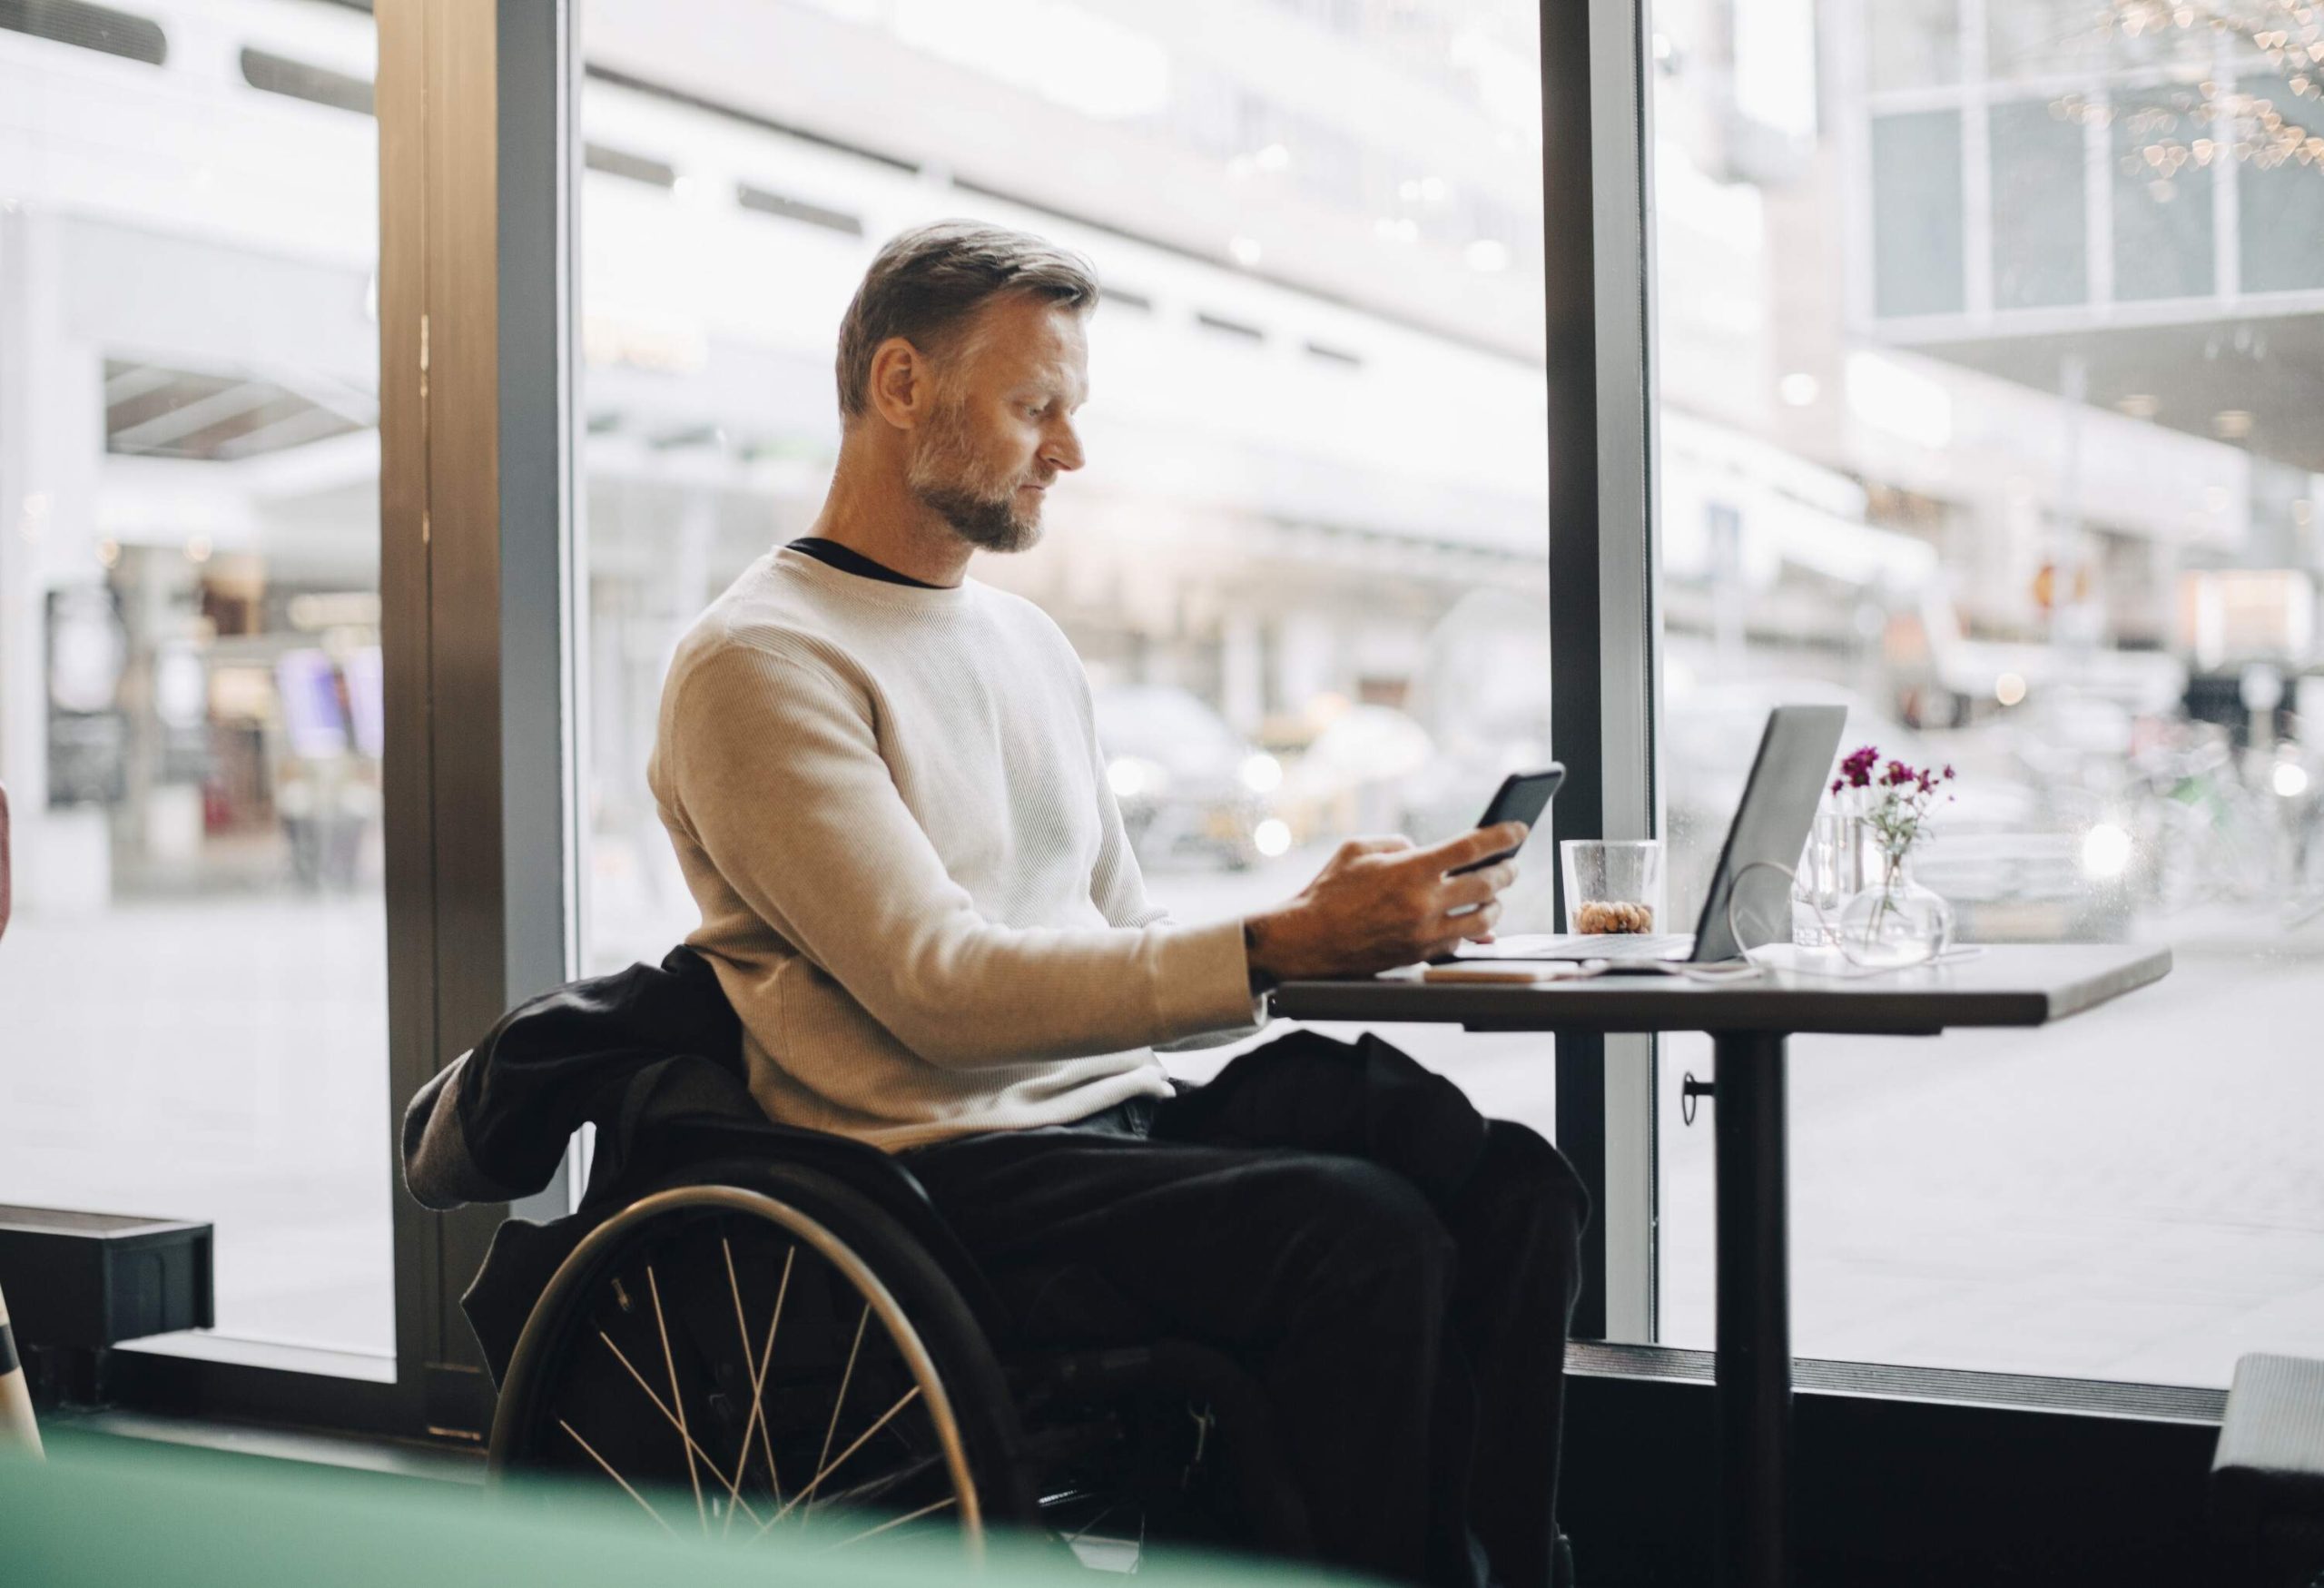 A man in a wheelchair looks at his mobile phone with his laptop on a table in a restaurant.